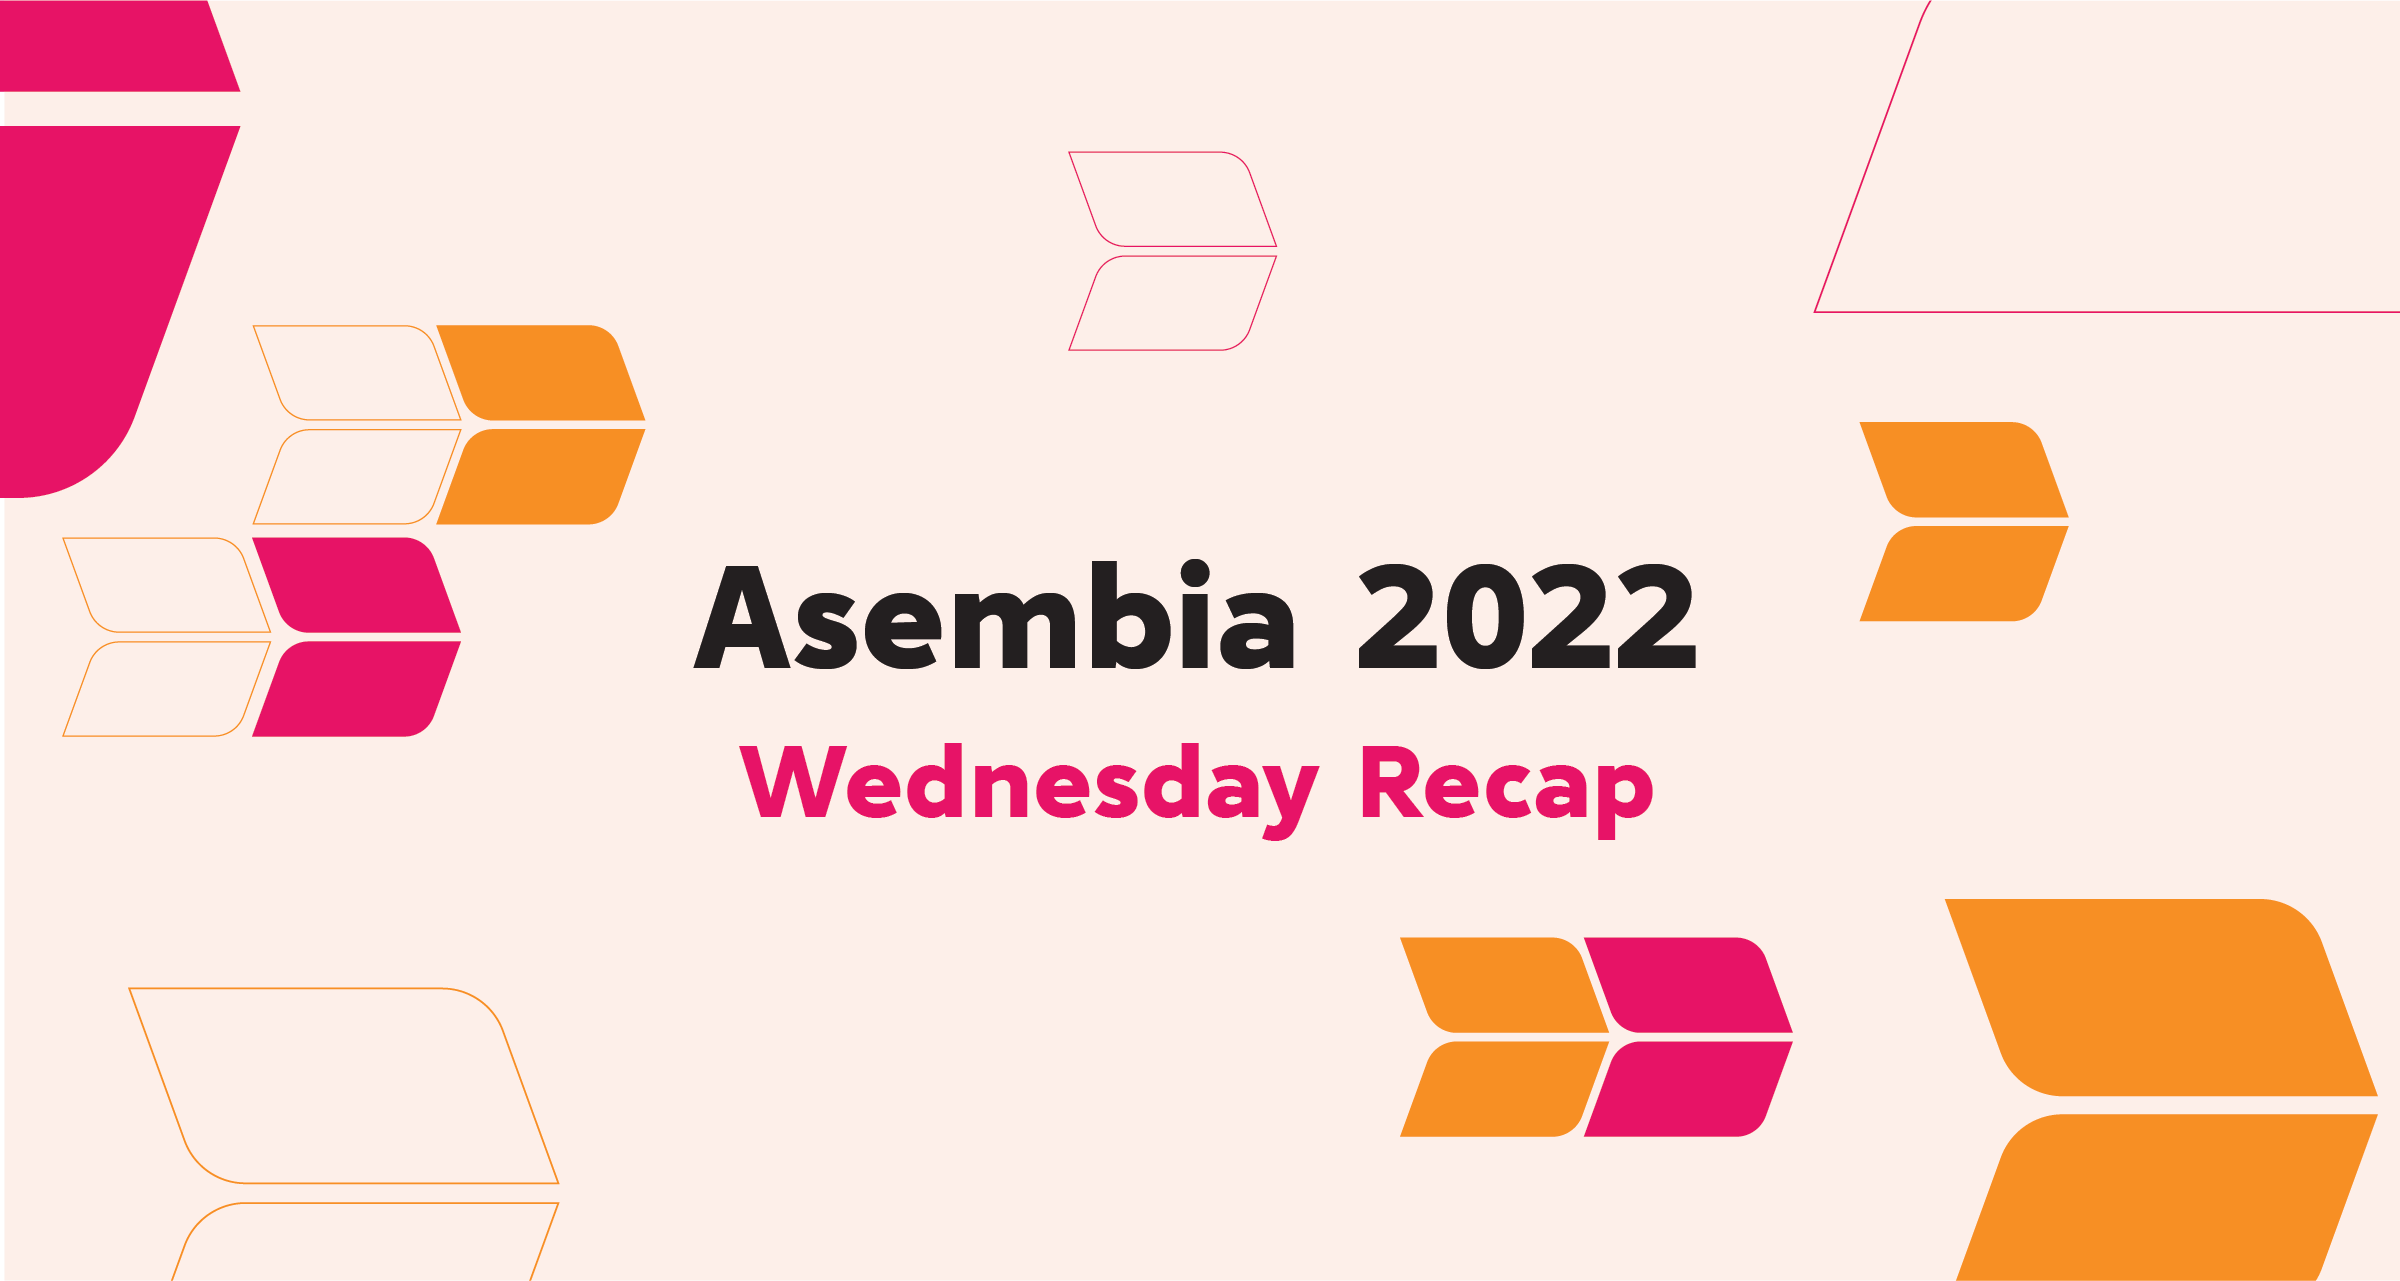 Asembia 2022 Weds Recap with magenta and orange arrows